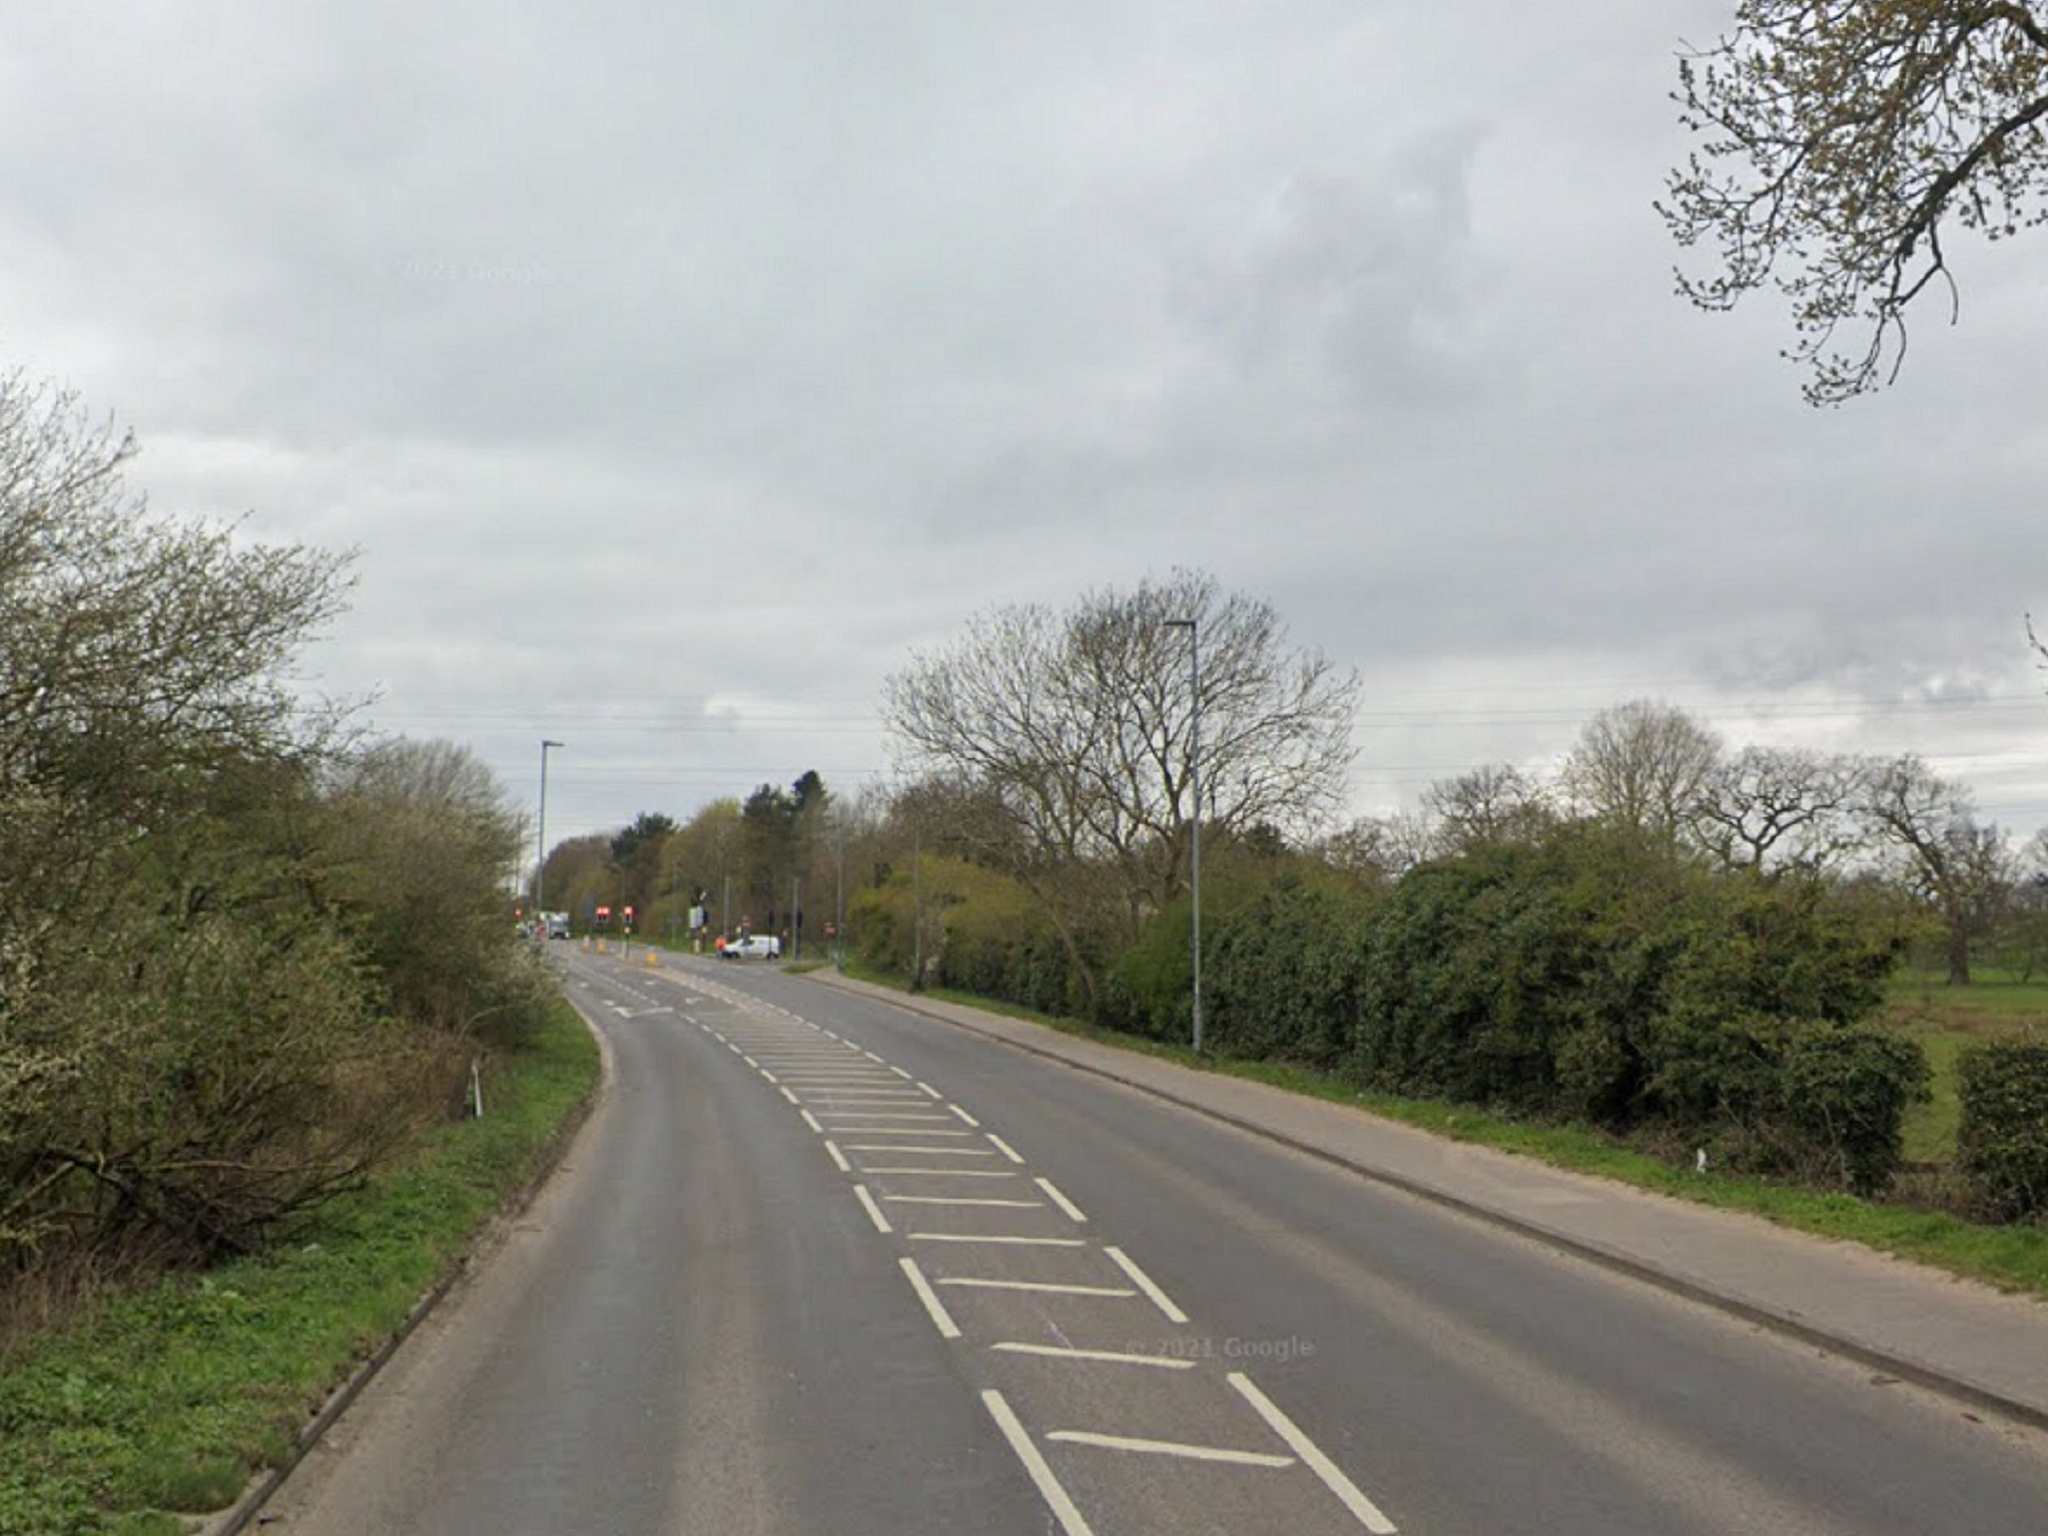 A woman has died after falling from the rear seat of a car on the B1108 in Norfolk